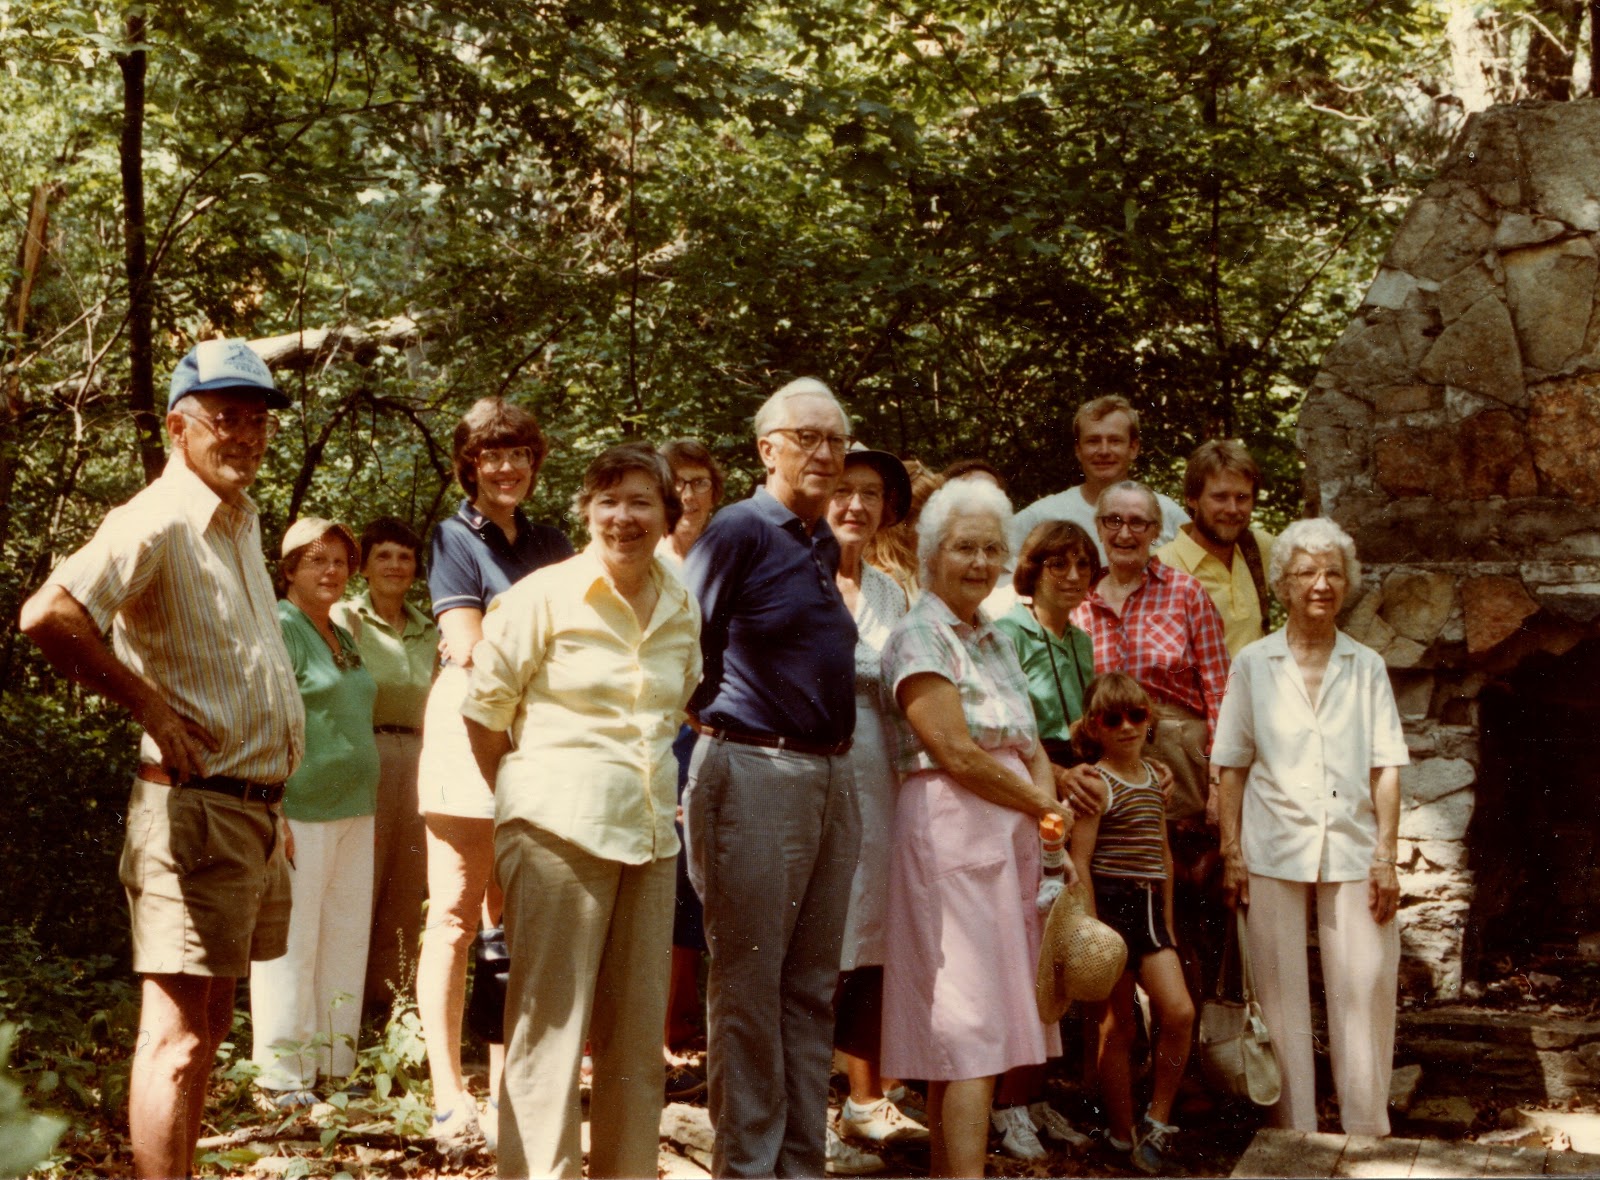 Visitors to River Bend 1983